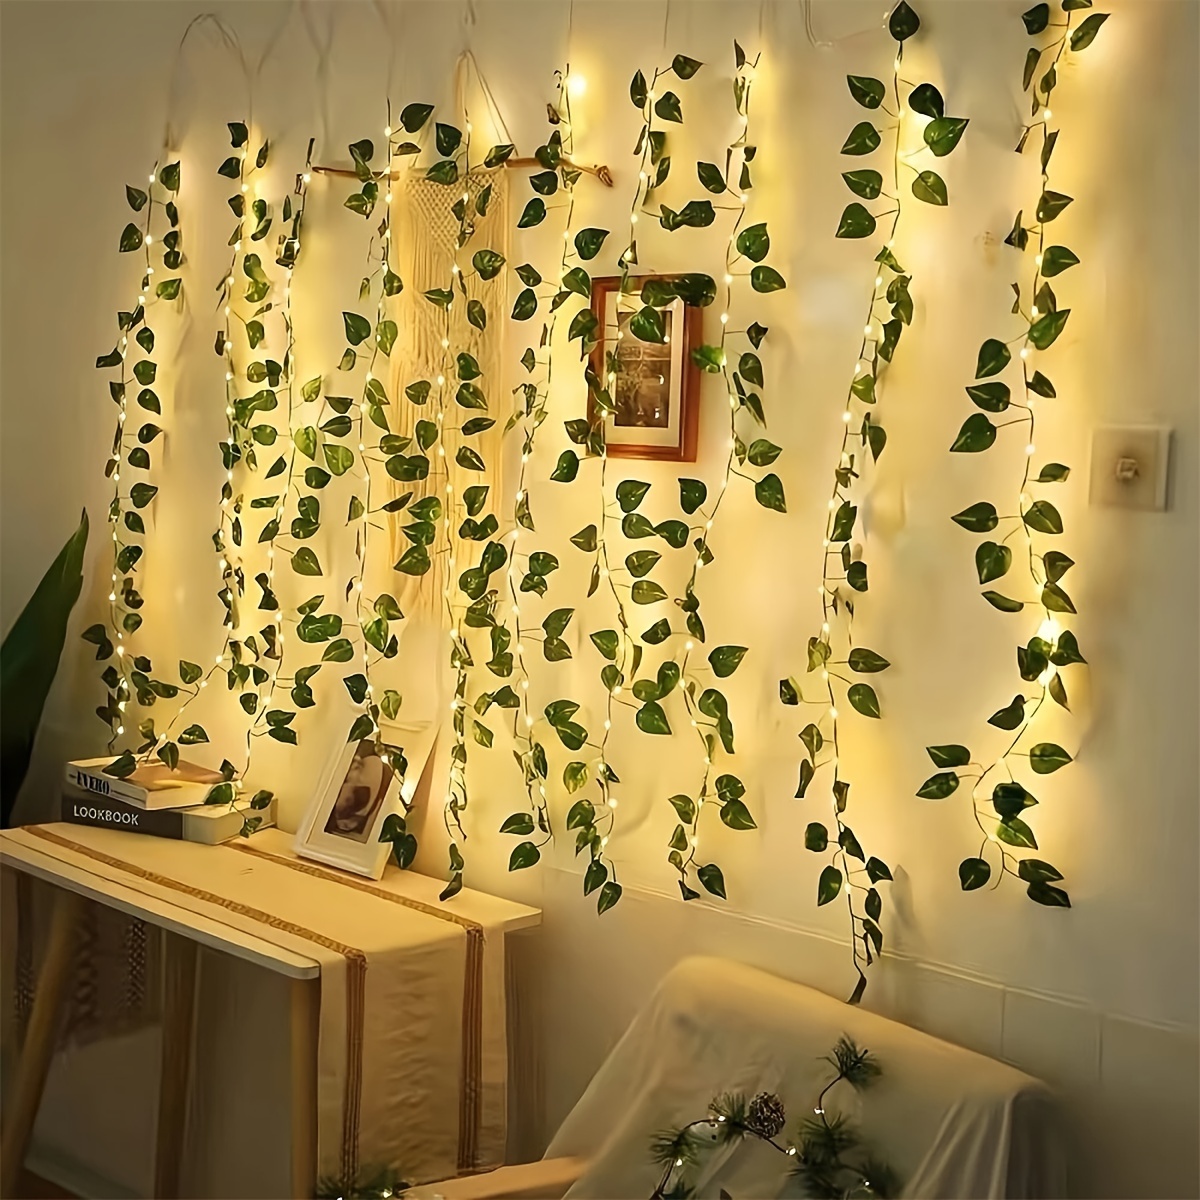 Aesthetic dorm room with led string fairy lights vines flowers